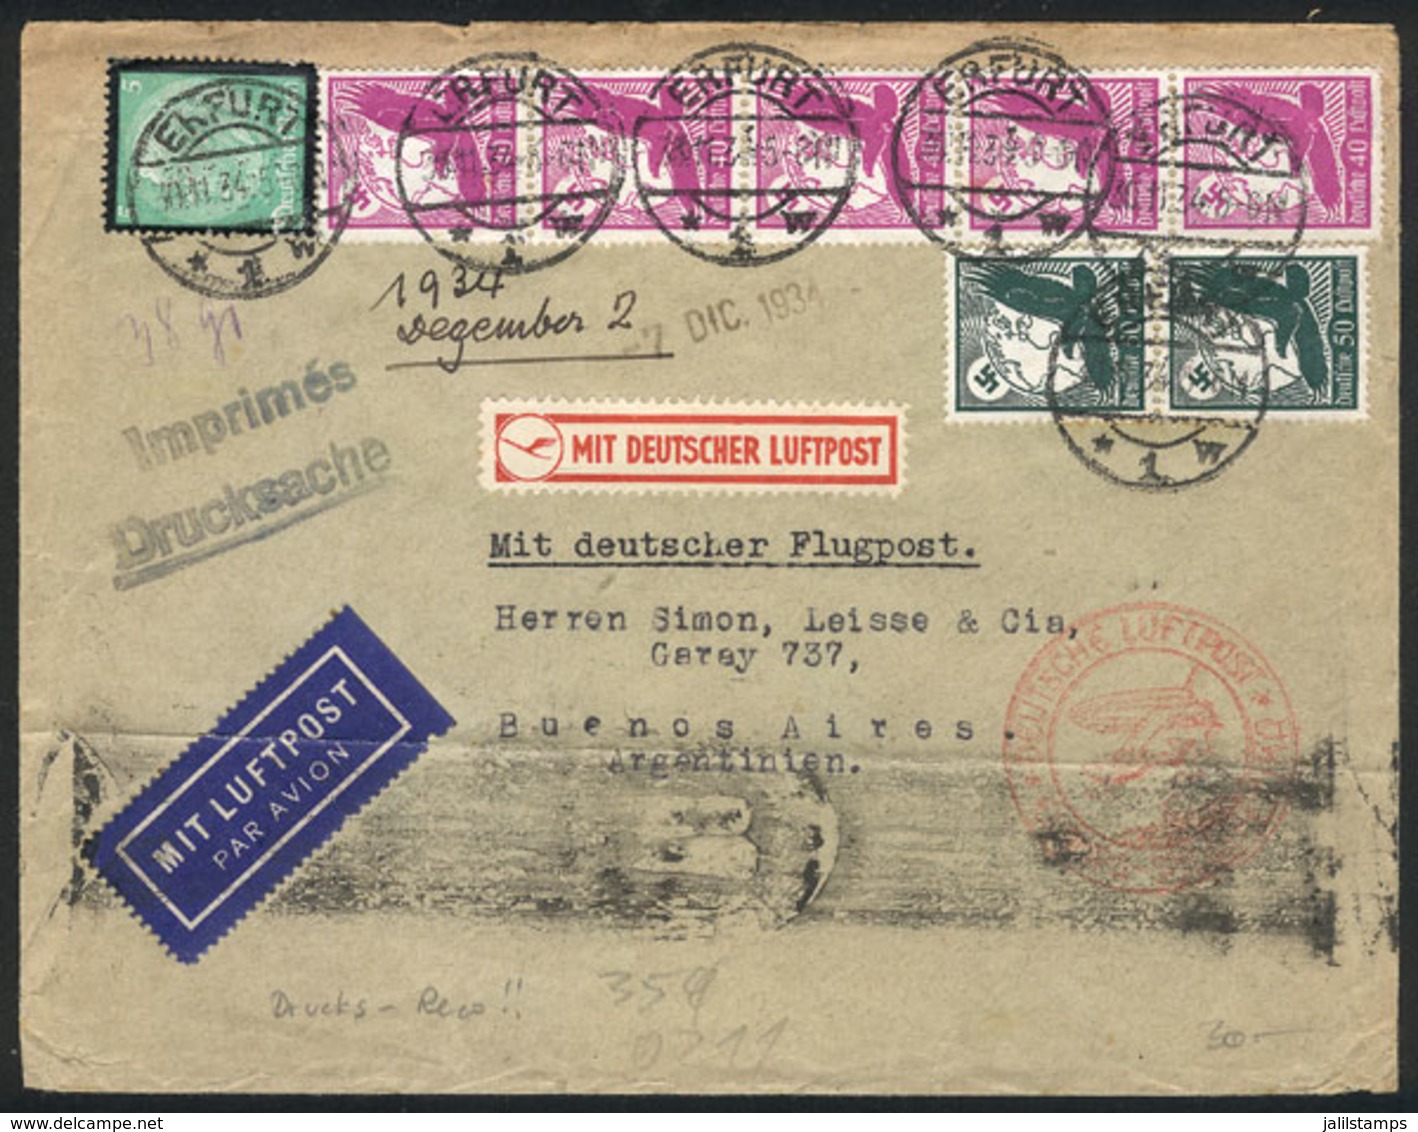 GERMANY: Airmail Cover (it Contained Printed Matter) Sent From Erfurt To Buenos Aires On 30/NO/1934 Franked With 3.05Mk. - Precursores